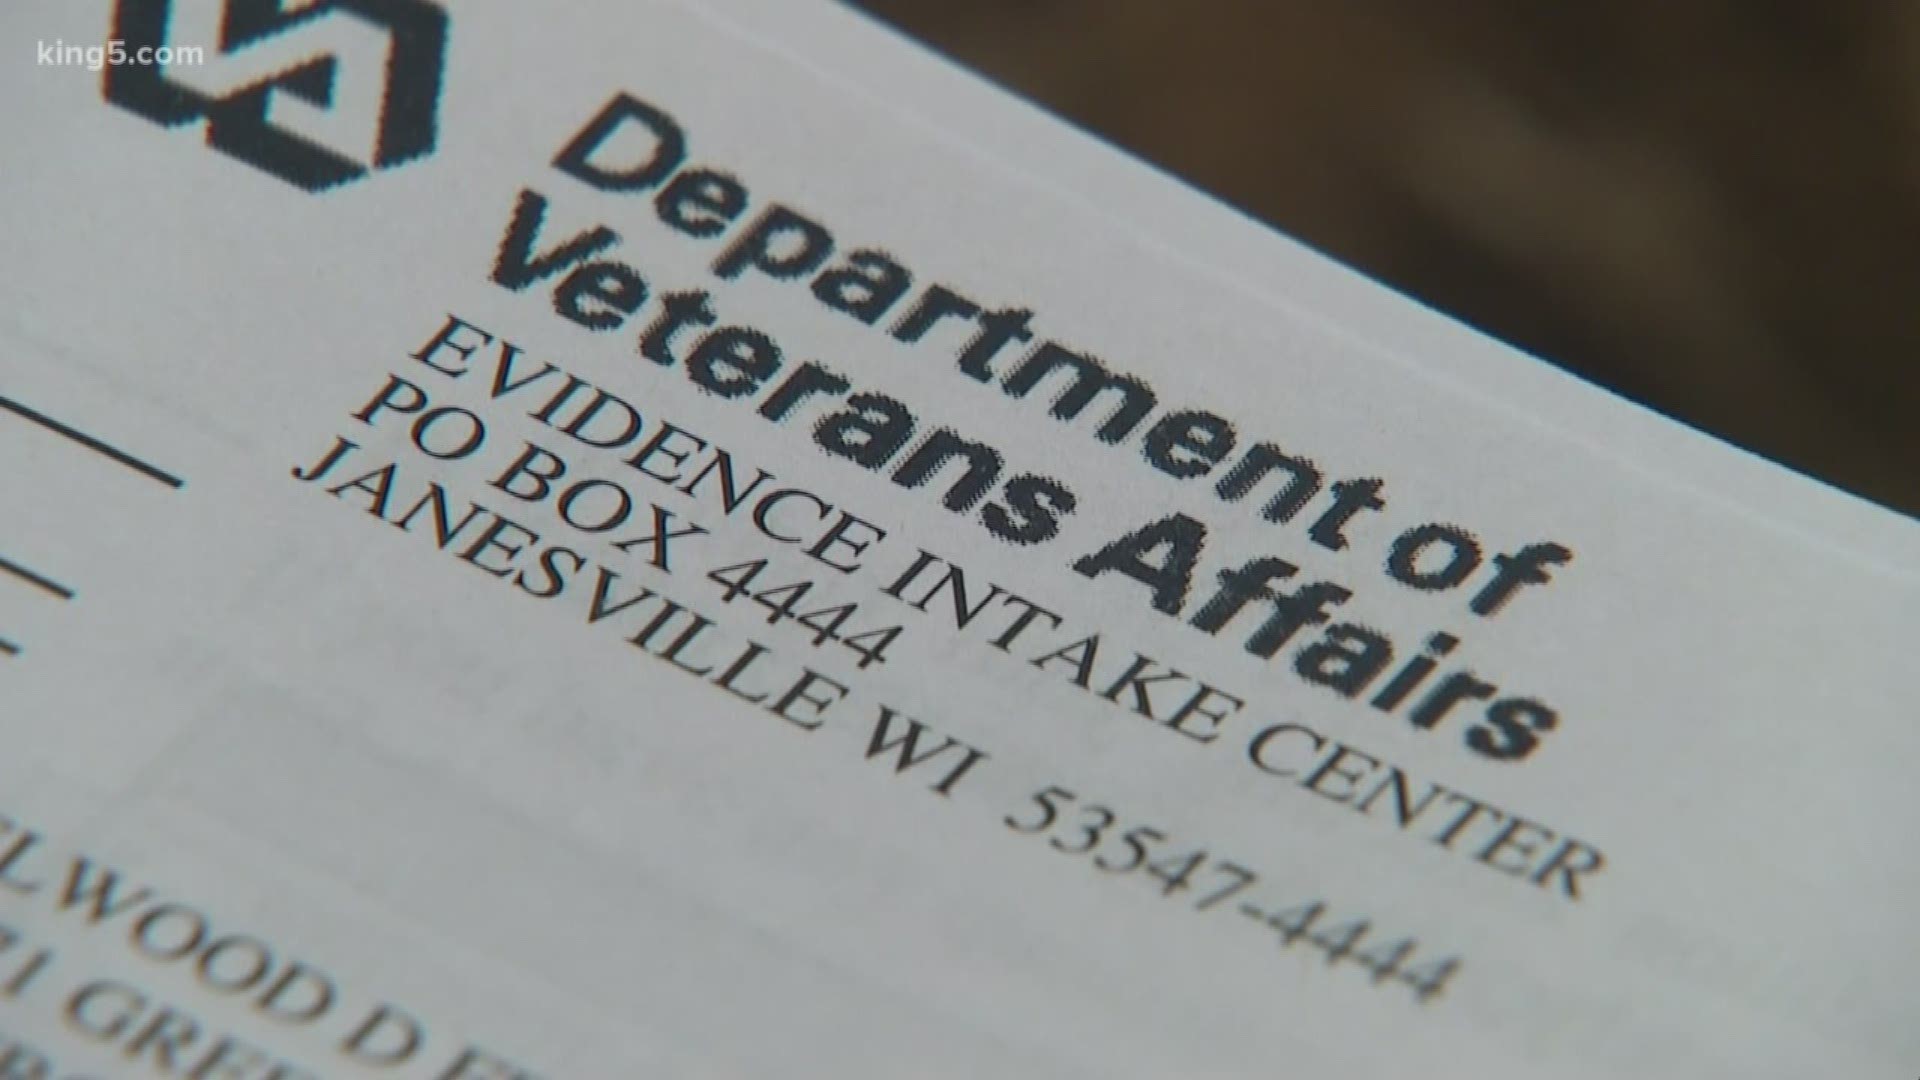 A local veteran is trying to find out how he ended up with hundreds of documents that didn't belong to him. They contained personal information about other veterans around the country. He is demanding answers and so are we, but so far we haven't gotten many. KING 5 Greg Copeland reports.